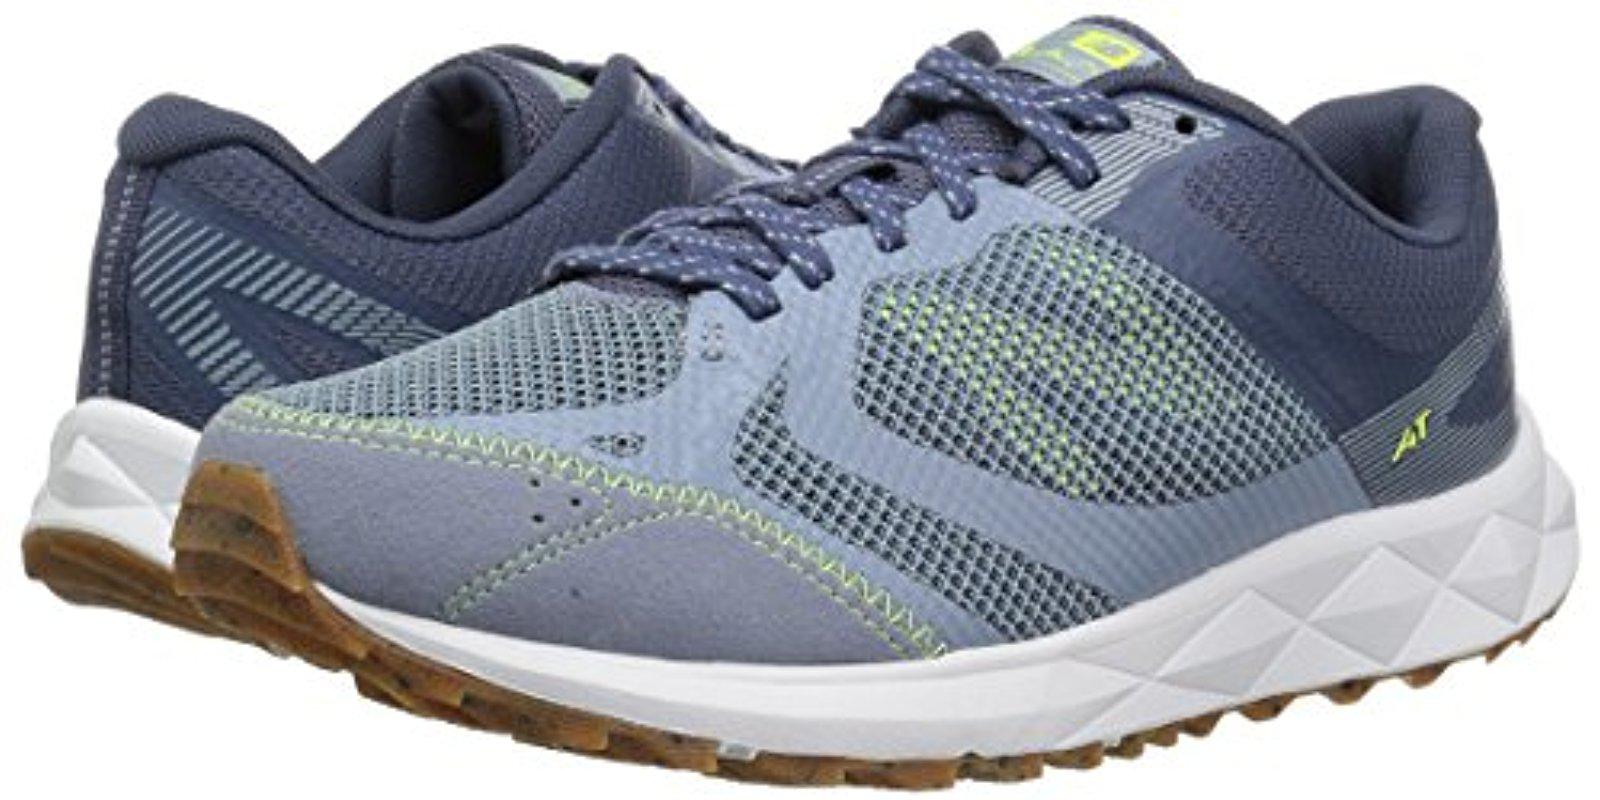 New Balance Synthetic 590v3 Trail Running Shoe in Blue - Lyst